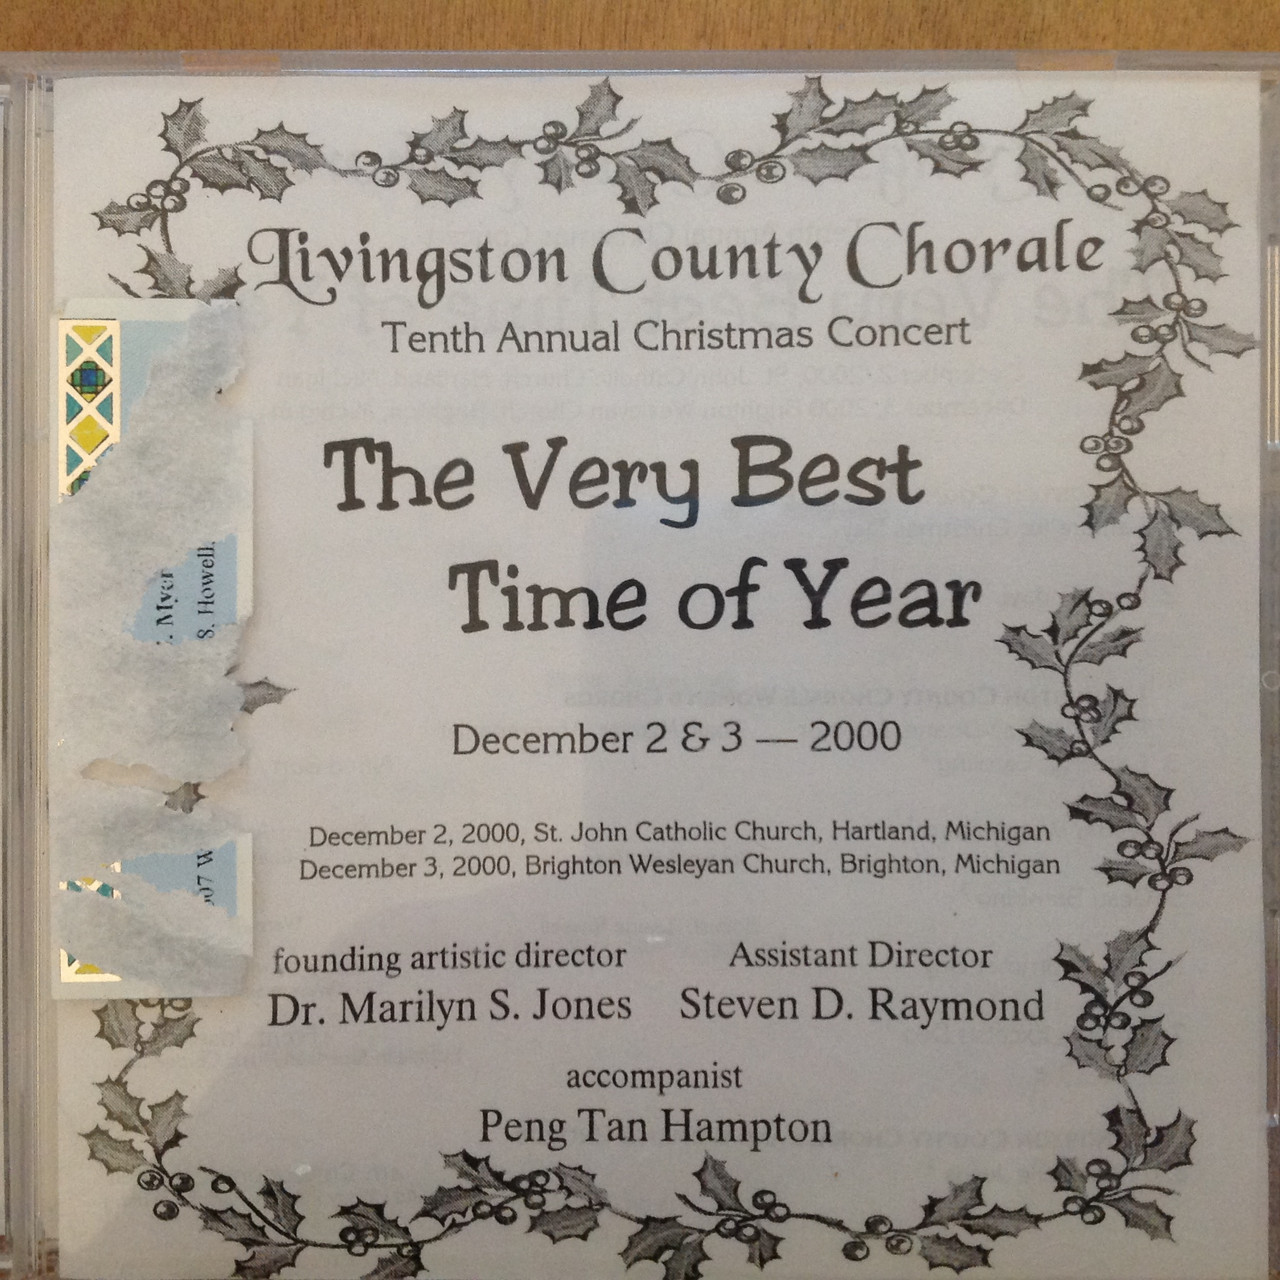 Livingston County Chorale Christmas Concert CD